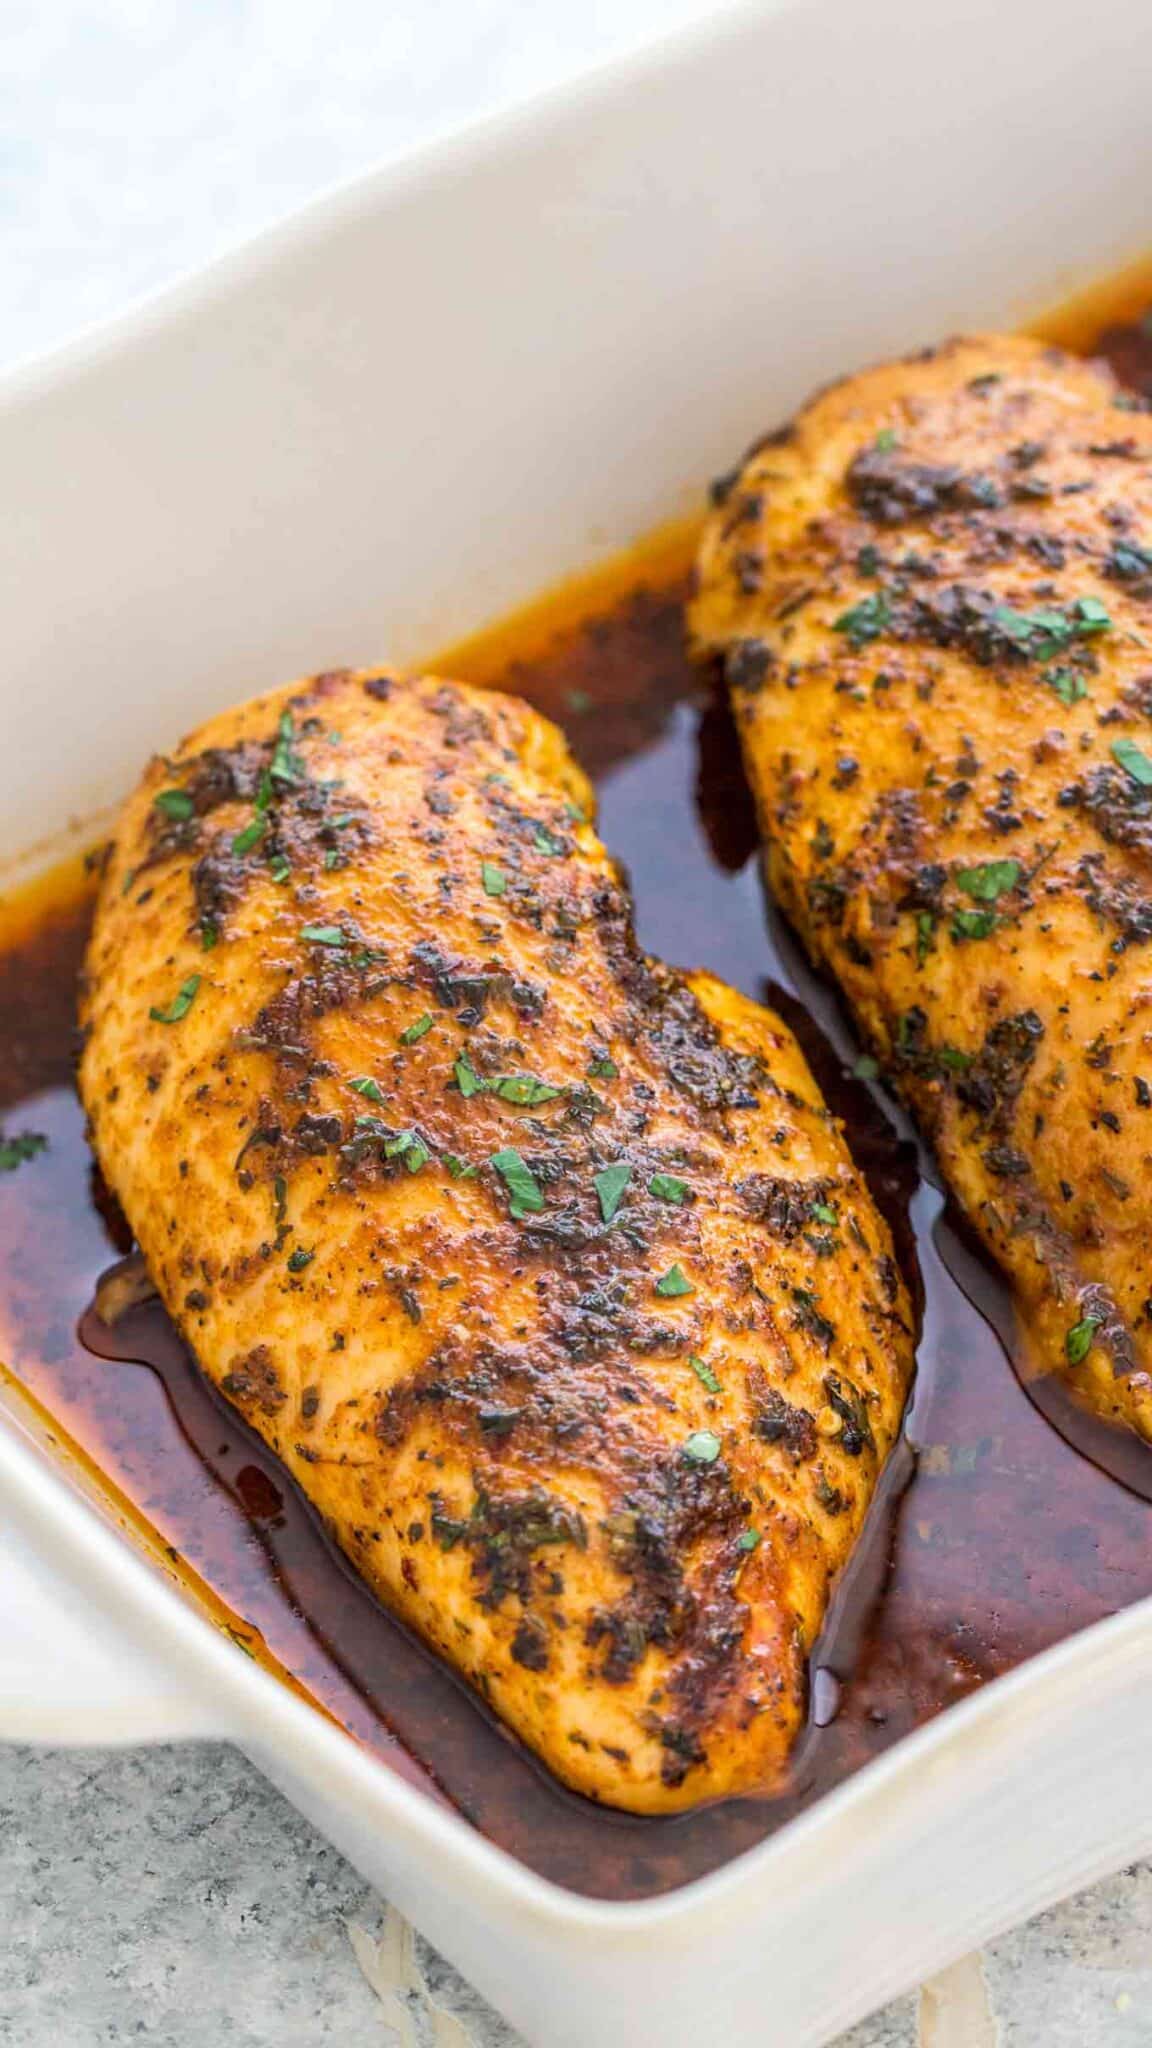 Oven Baked Chicken Breasts Recipe: Juicy & Flavorful [Video] - S&SM